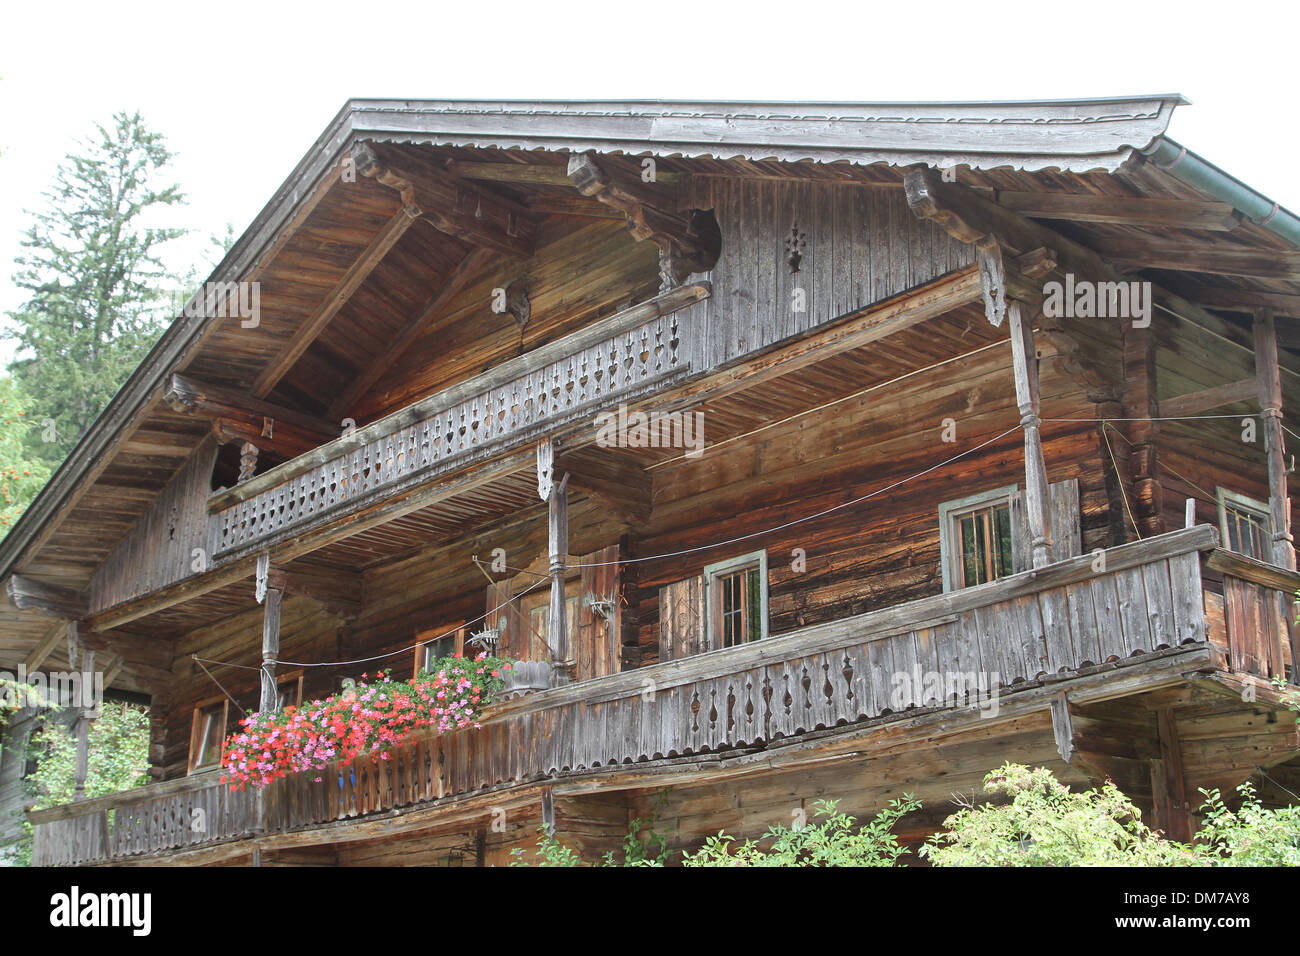 The oldest building in Soll, Austria Stock Photo